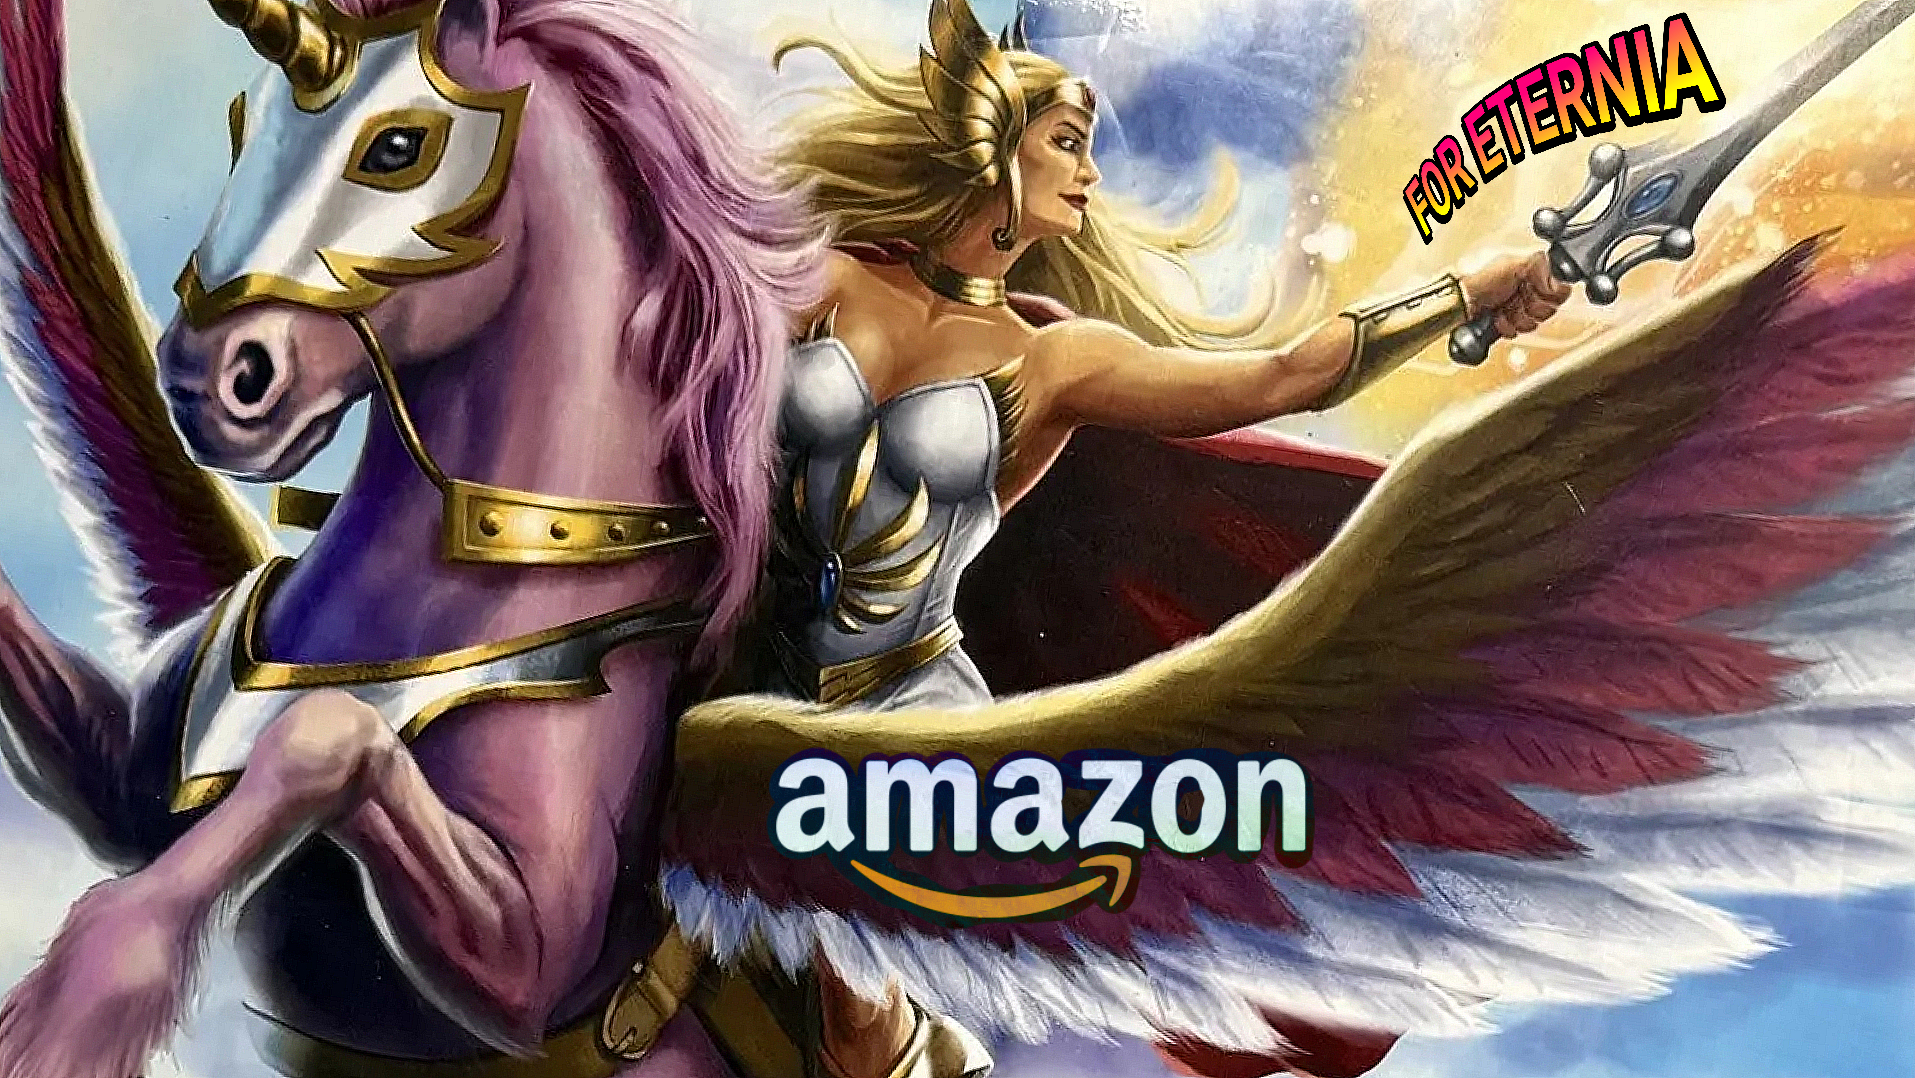 So what ever happened to the She-Ra Live-Action Series from Amazon Studios?